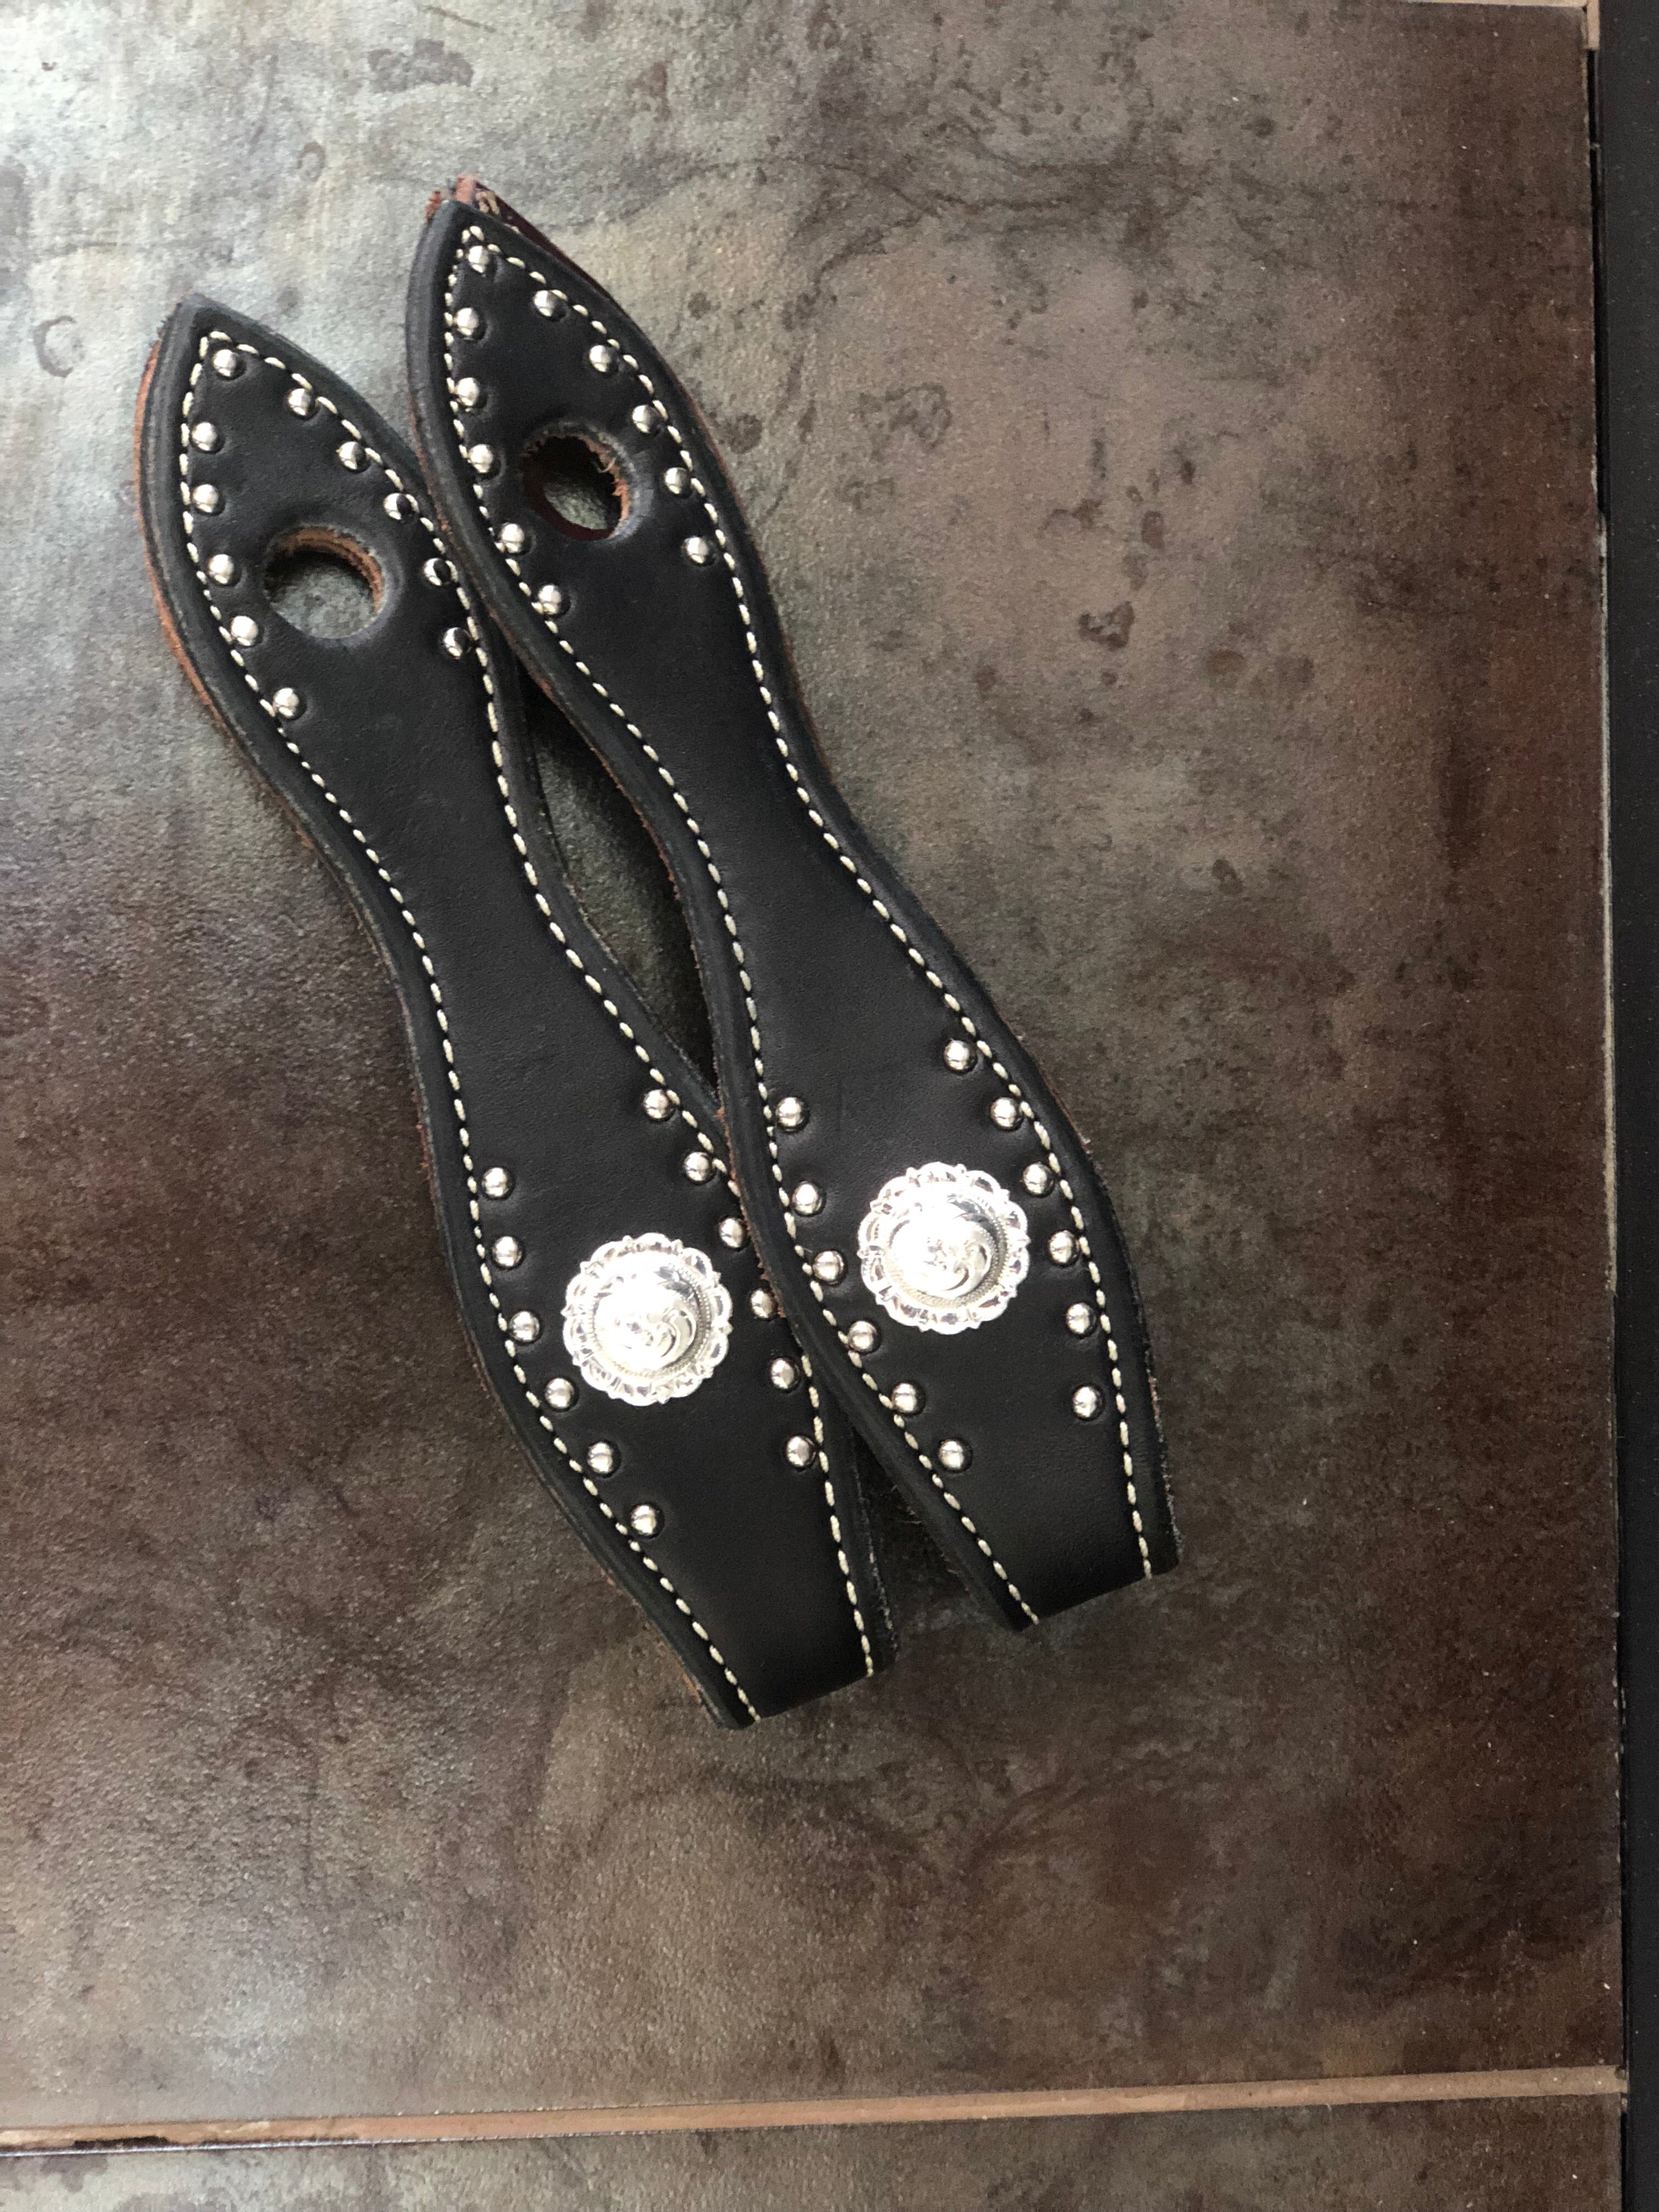 Silver Snaffle Bit Rig w/Card Suits, Mecate, Slobber Straps and Curb Strap Jack Adkins